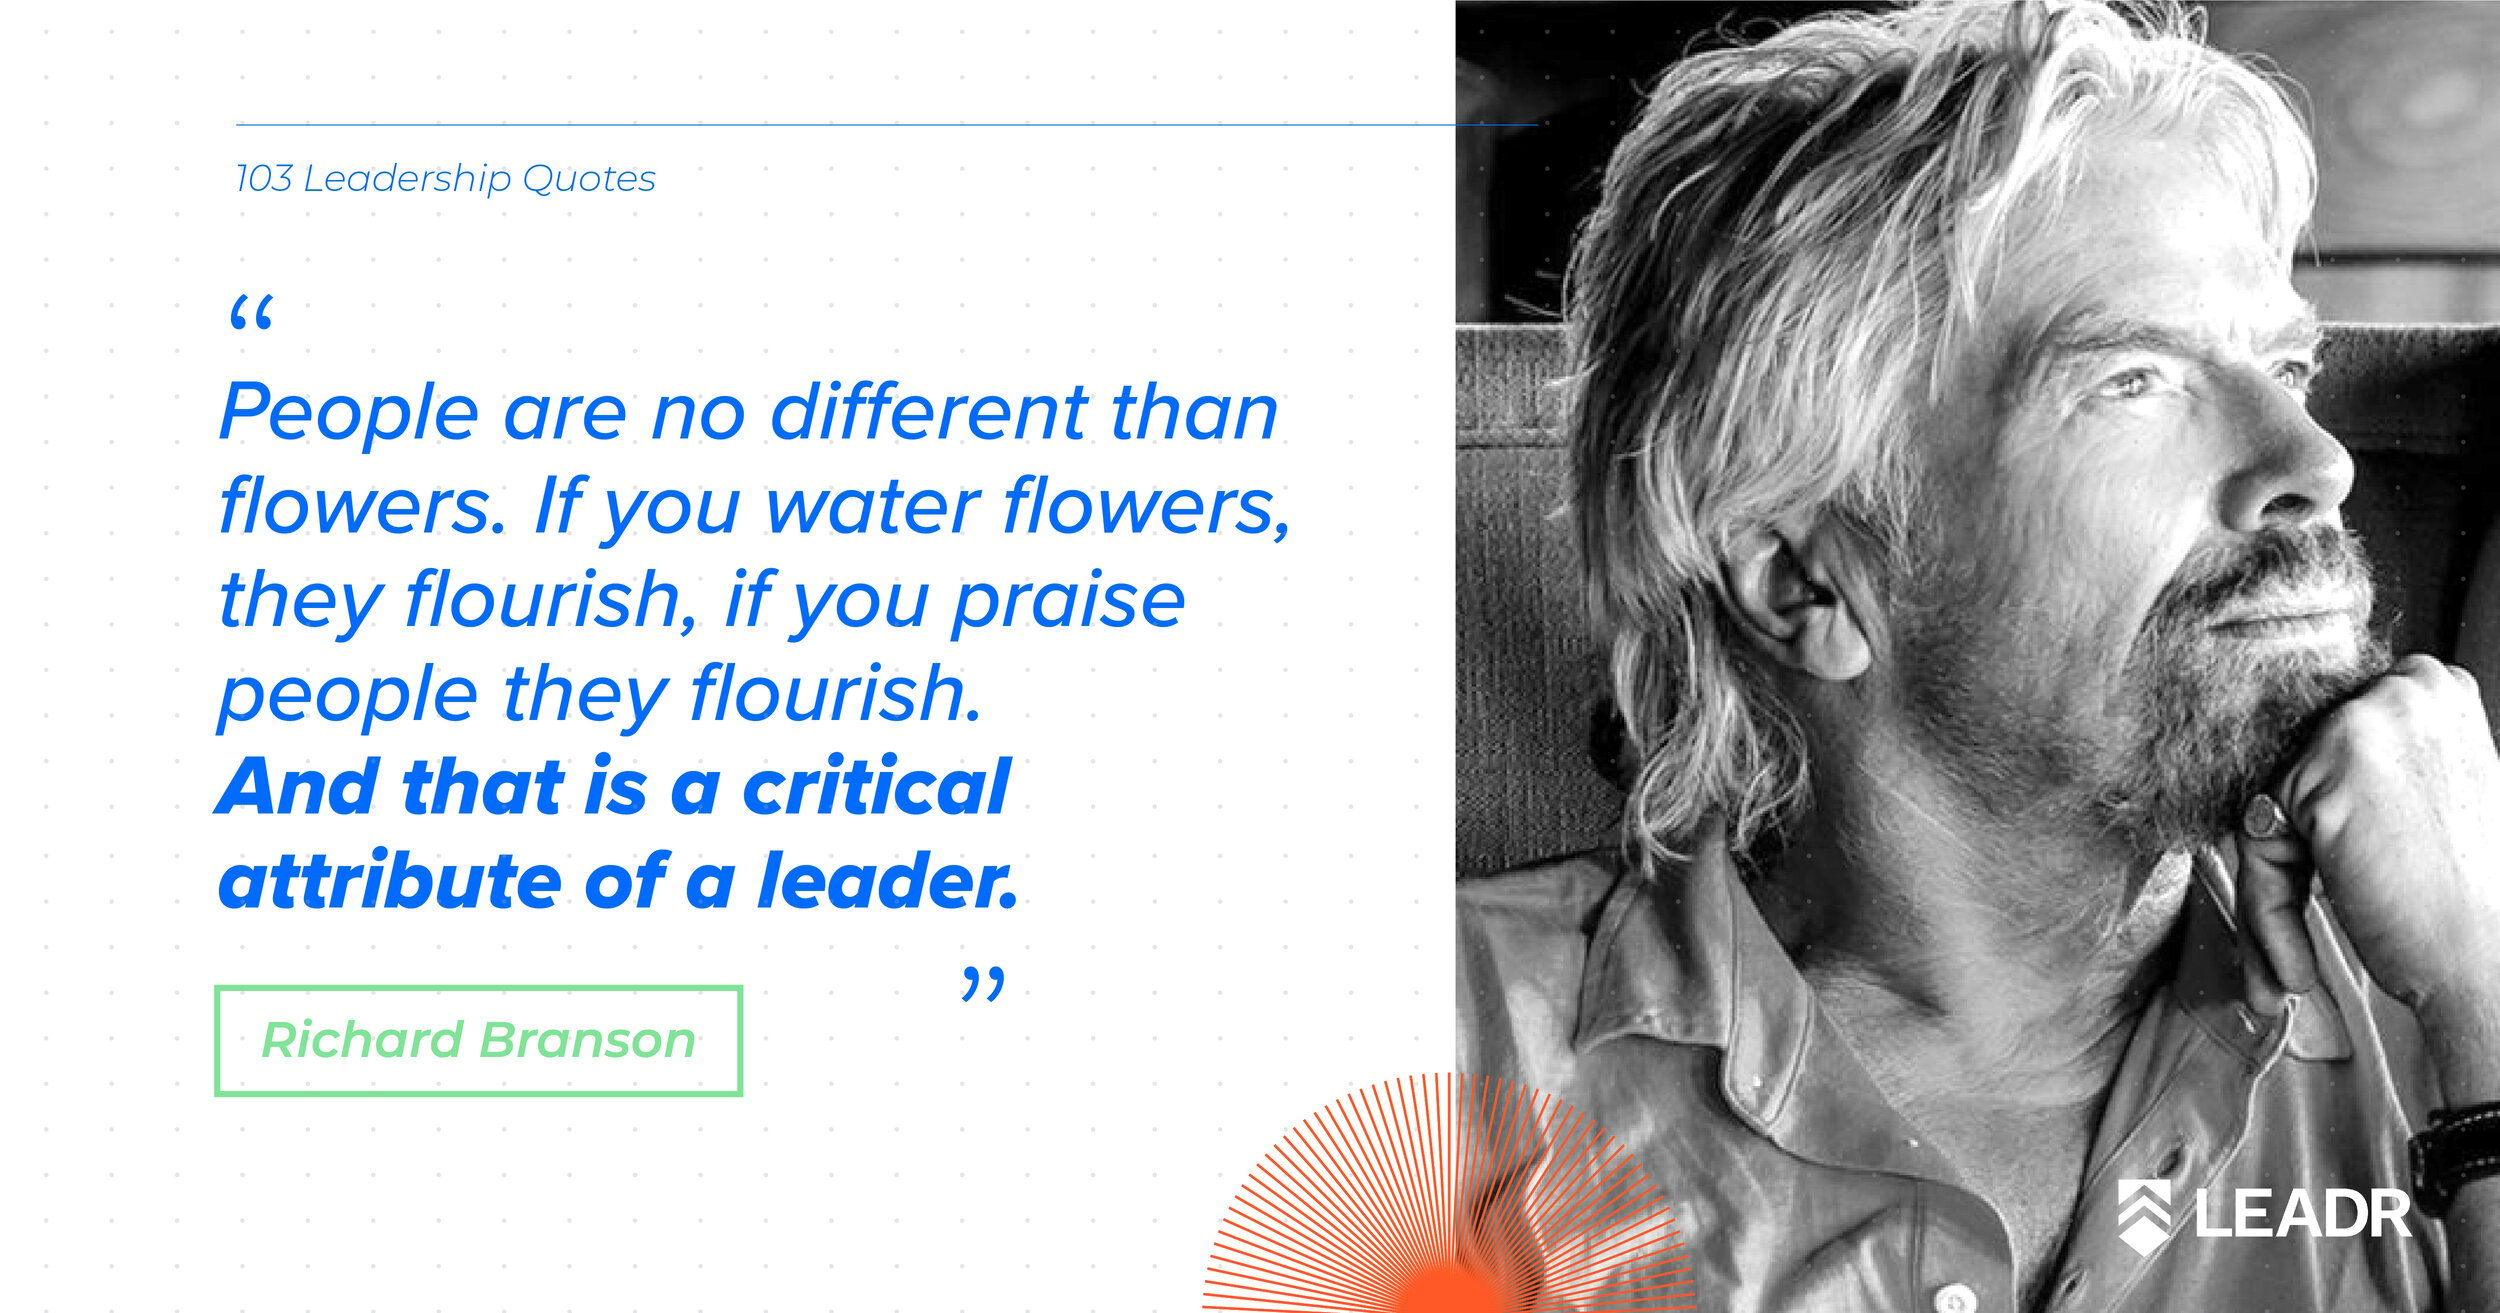 Royalty free downloadable leadership quotes - Richard Branson